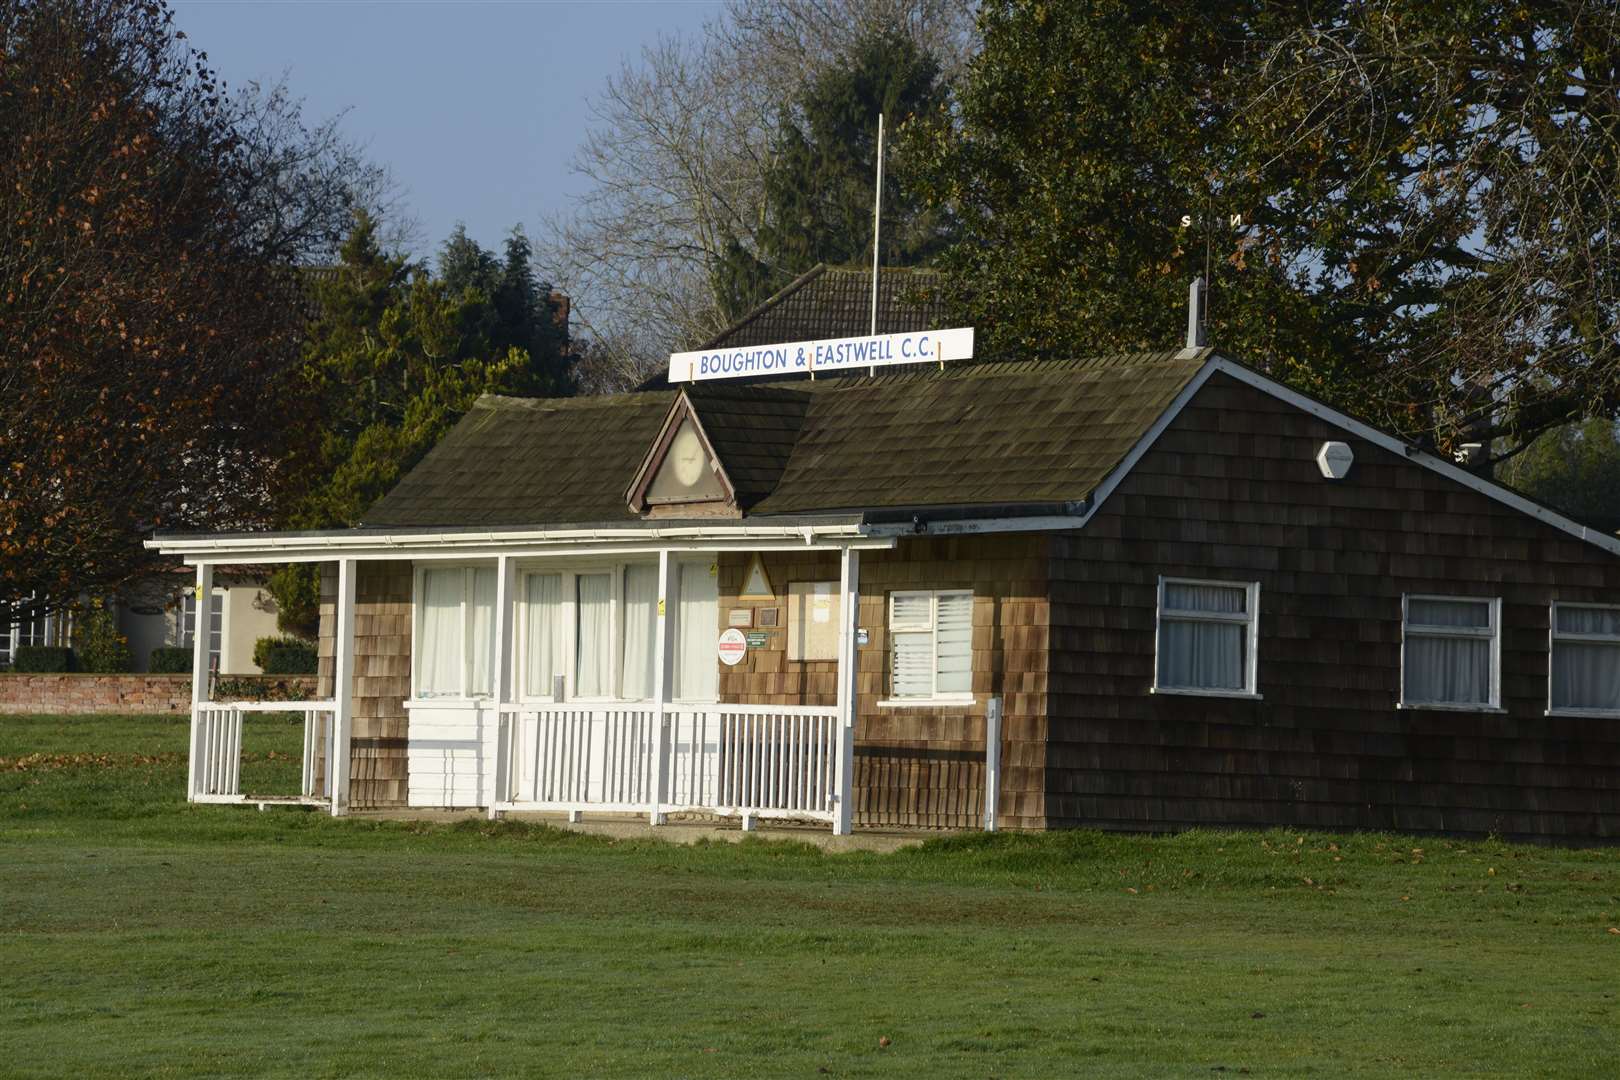 The Boughton and Eastwell cricket pavillion could be knocked down under new plans. Picture: Paul Amos